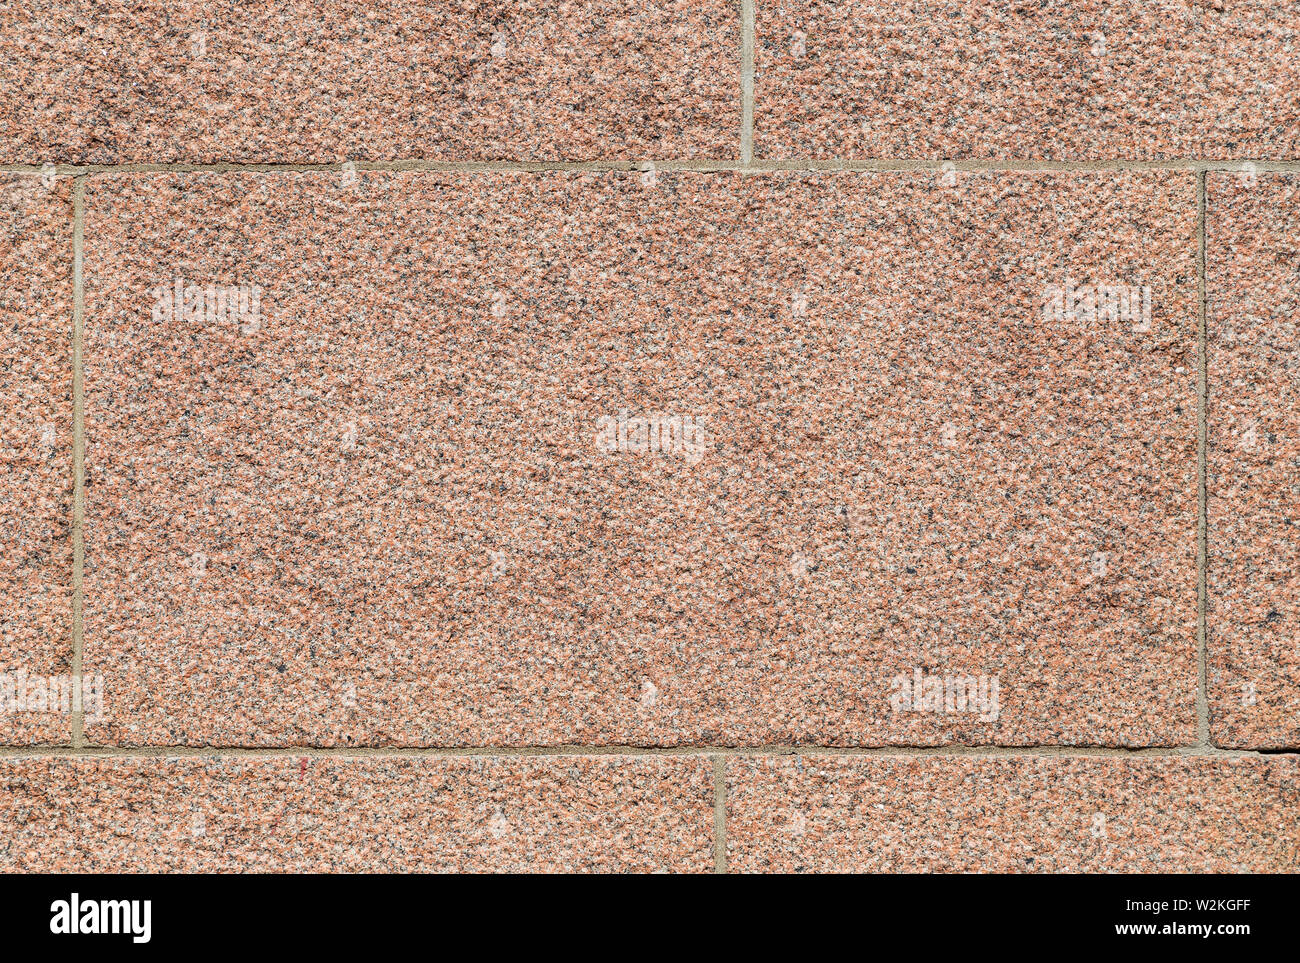 Close-up of part of a bumpy red granite block stone wall. High resolution full frame background texture. Stock Photo